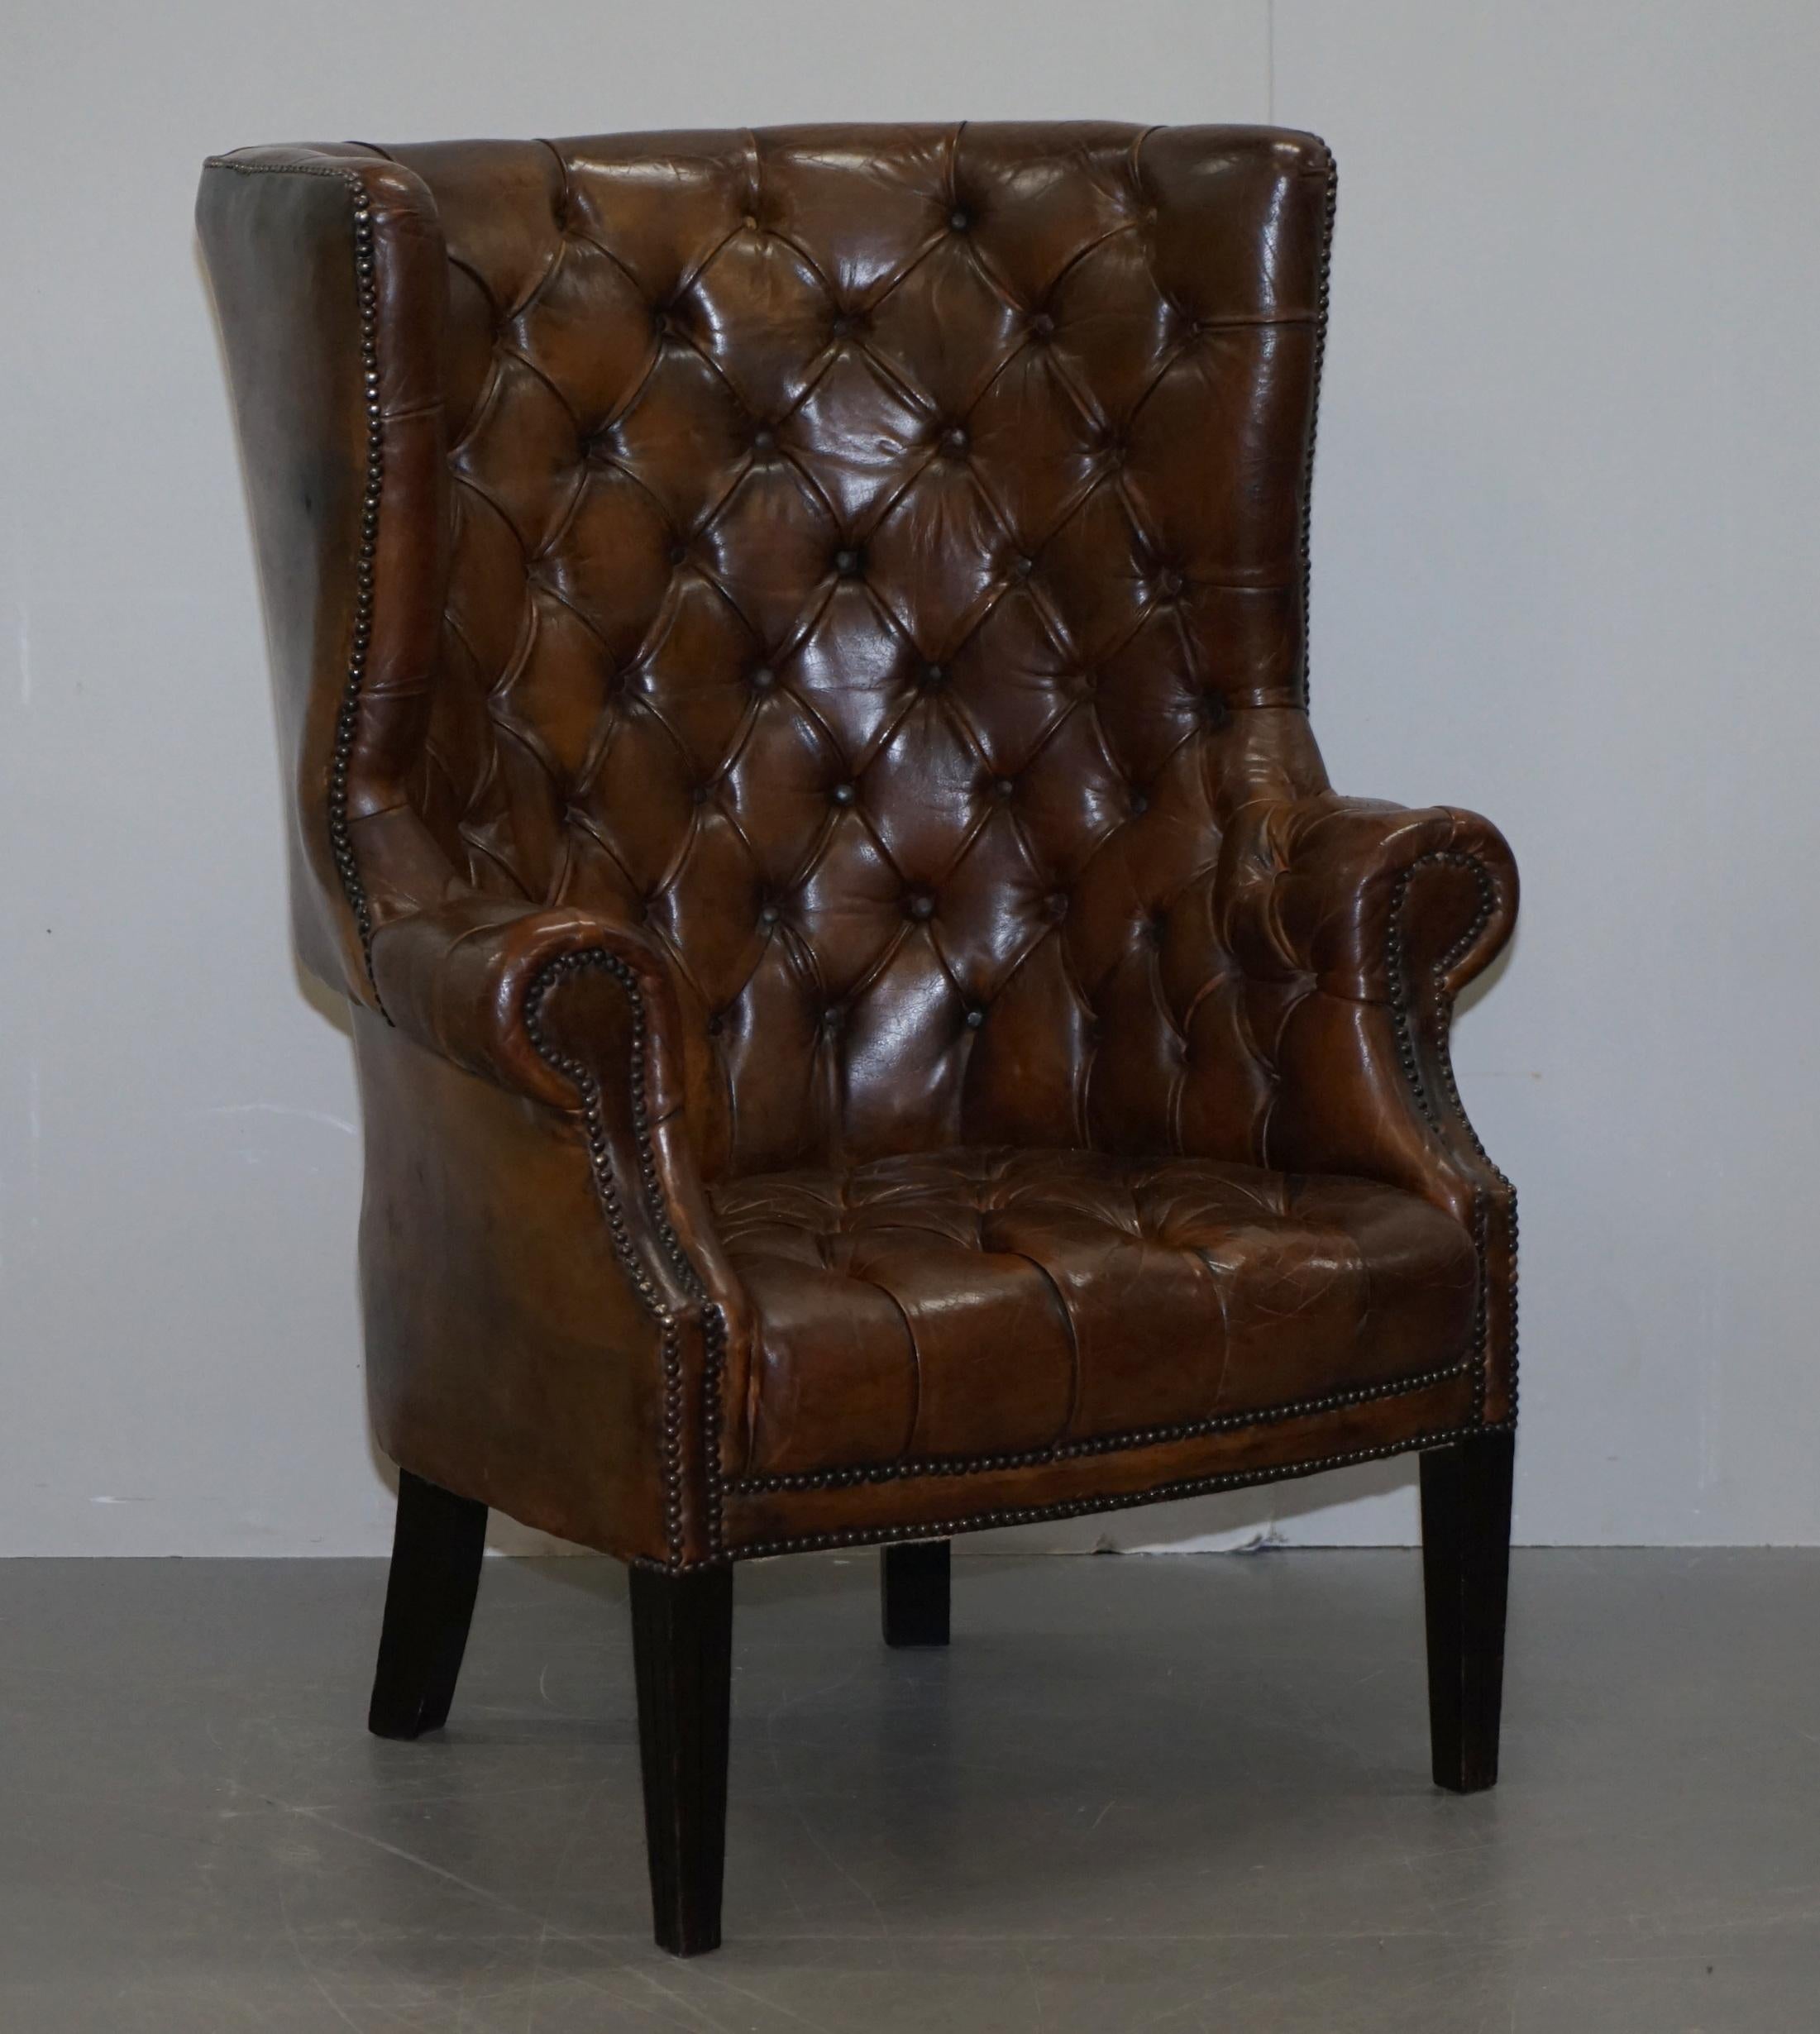 We are delighted to offer for sale this stunning pair of lovely late Victorian Porters barrel back armchairs in cigar brown leather 

These chairs are a real tour de force, they have absolutely everything going for them, the leather hide is